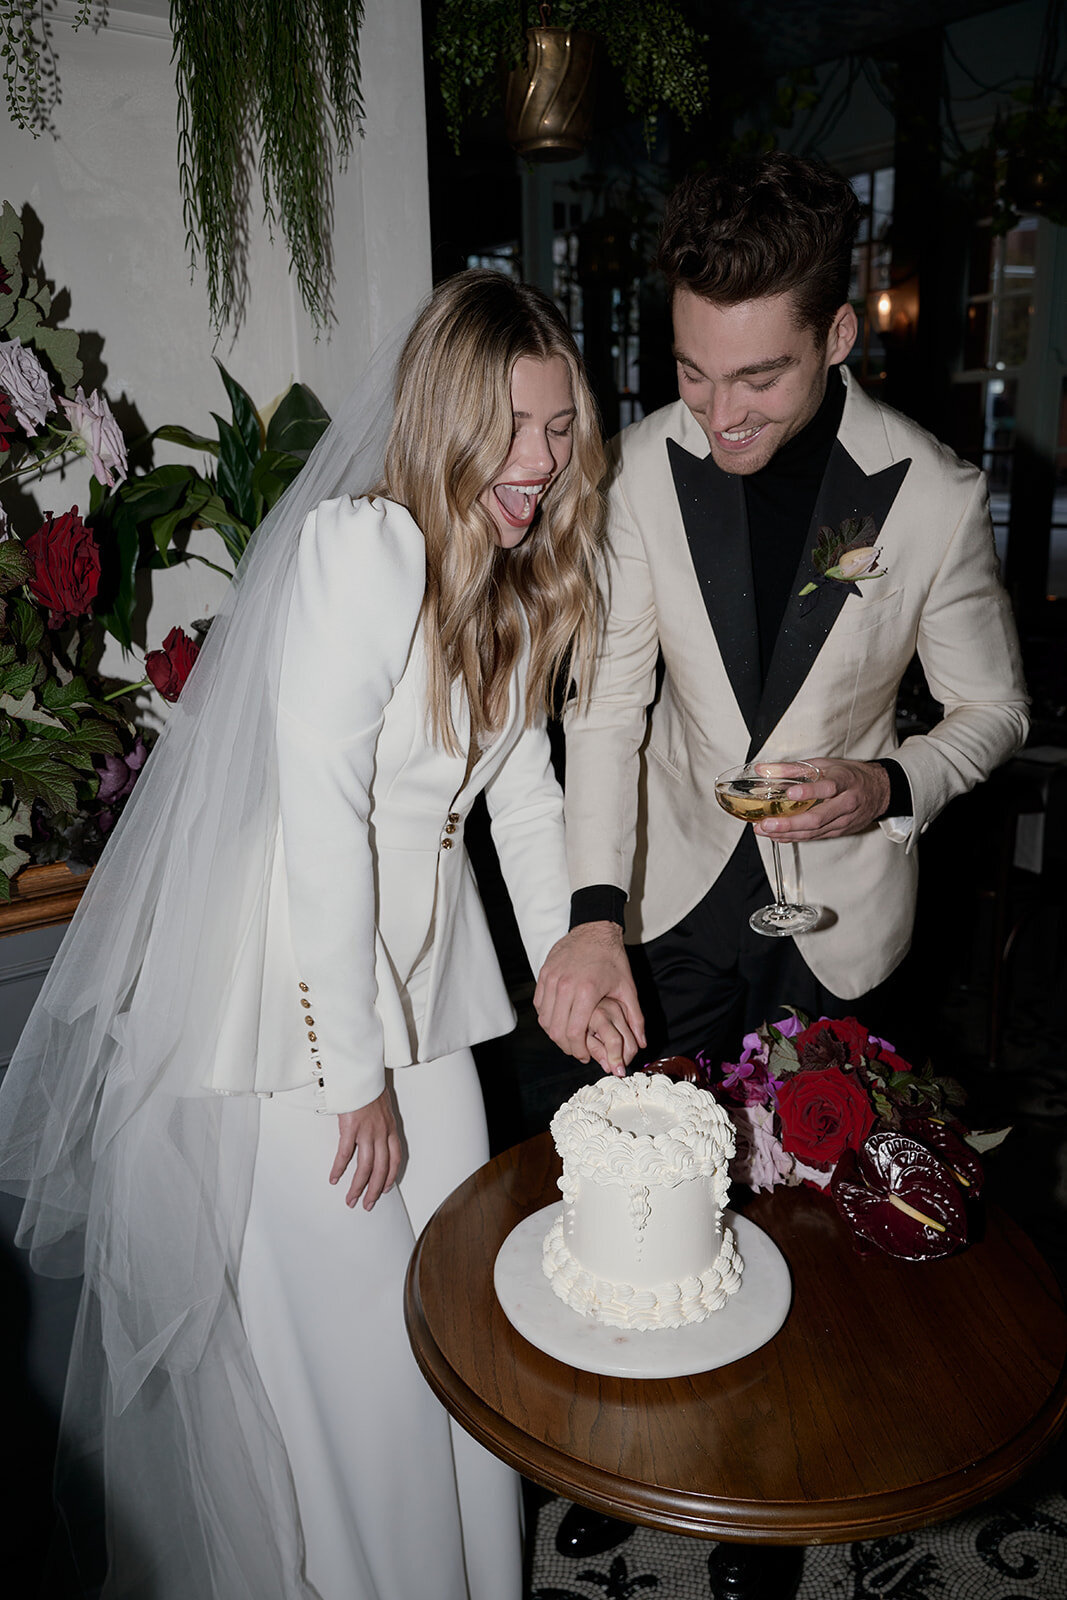 Bride and groom cutting the cake together while having fun and drinking champagne after their ceremony at Kittyhawk in Sydney.